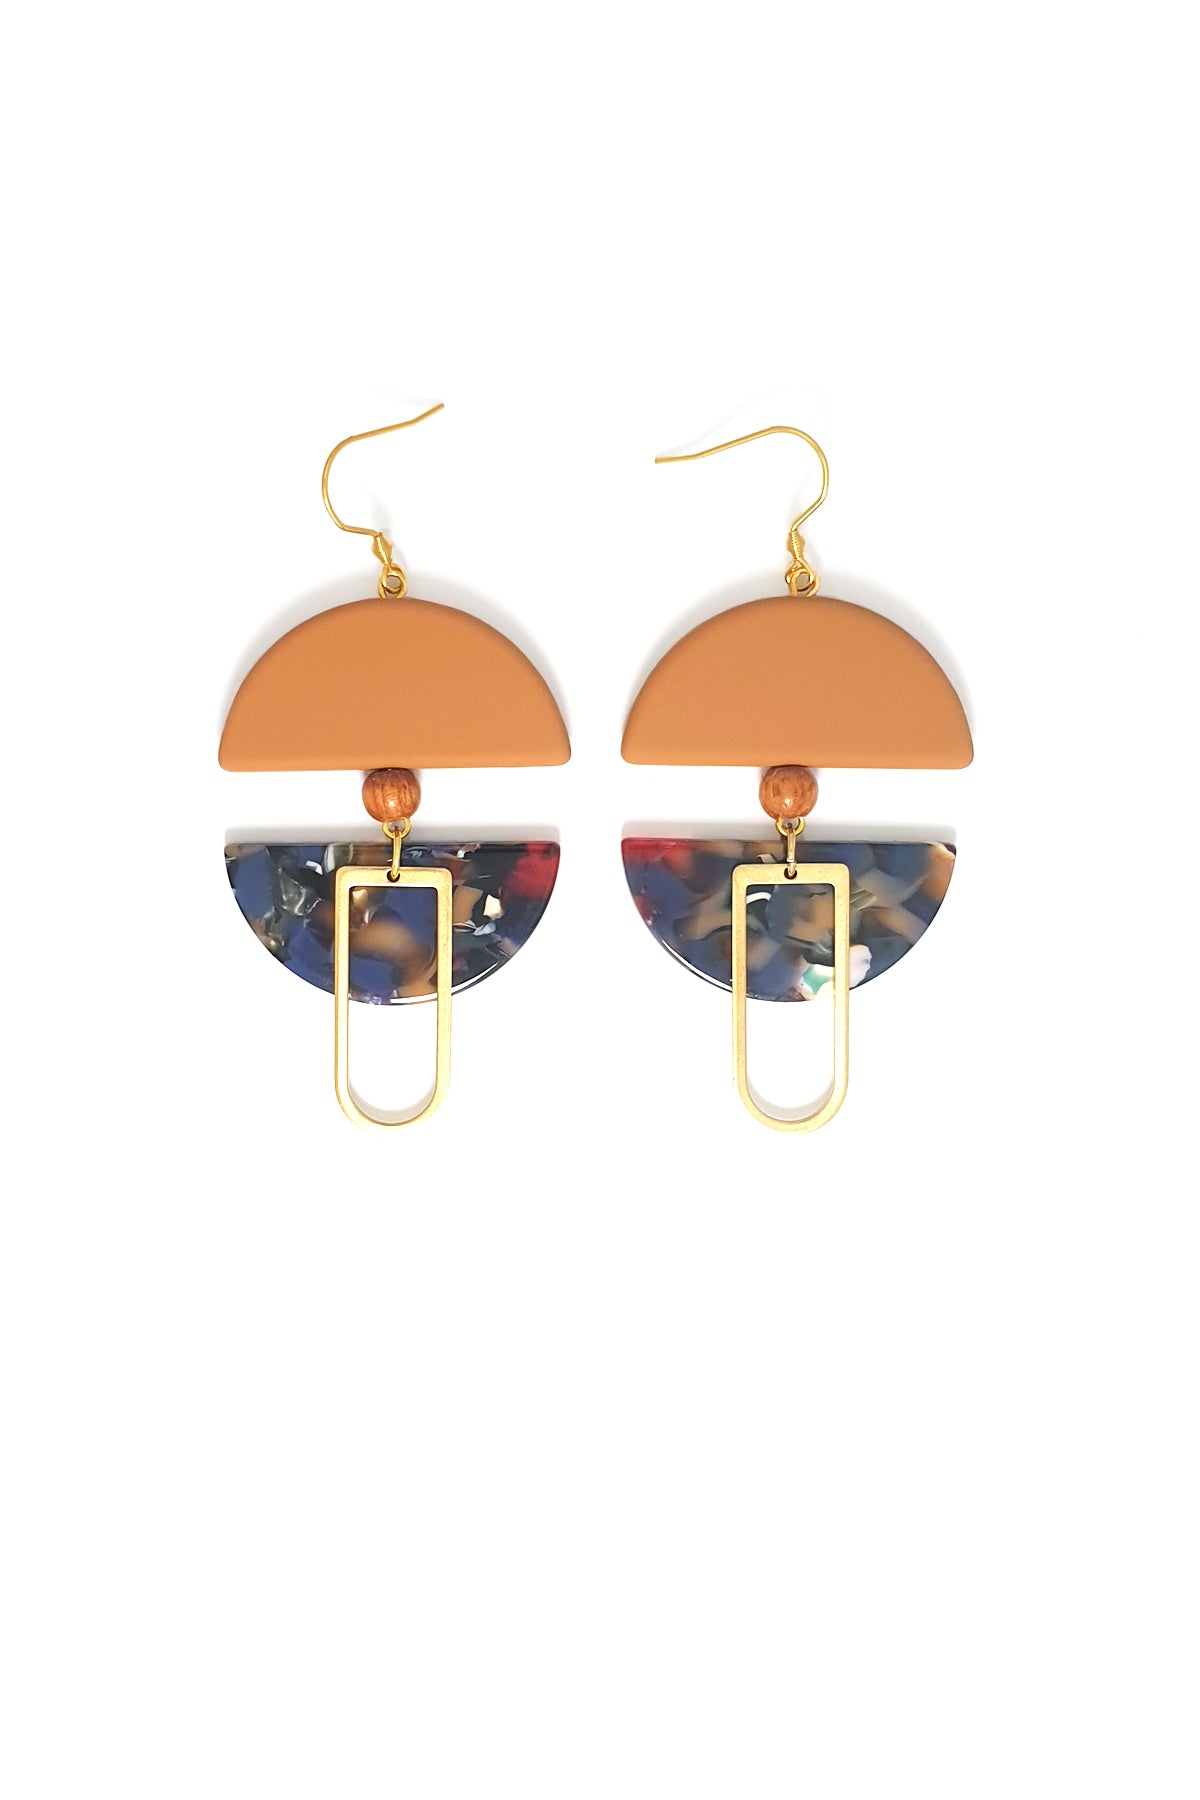 A pair of dangle earrings with a hook sit against a white background. They feature a mustard arch shaped bead, a small wooden bead, a blue and mustard acrylic half circle, and an elongated D shape brass piece.